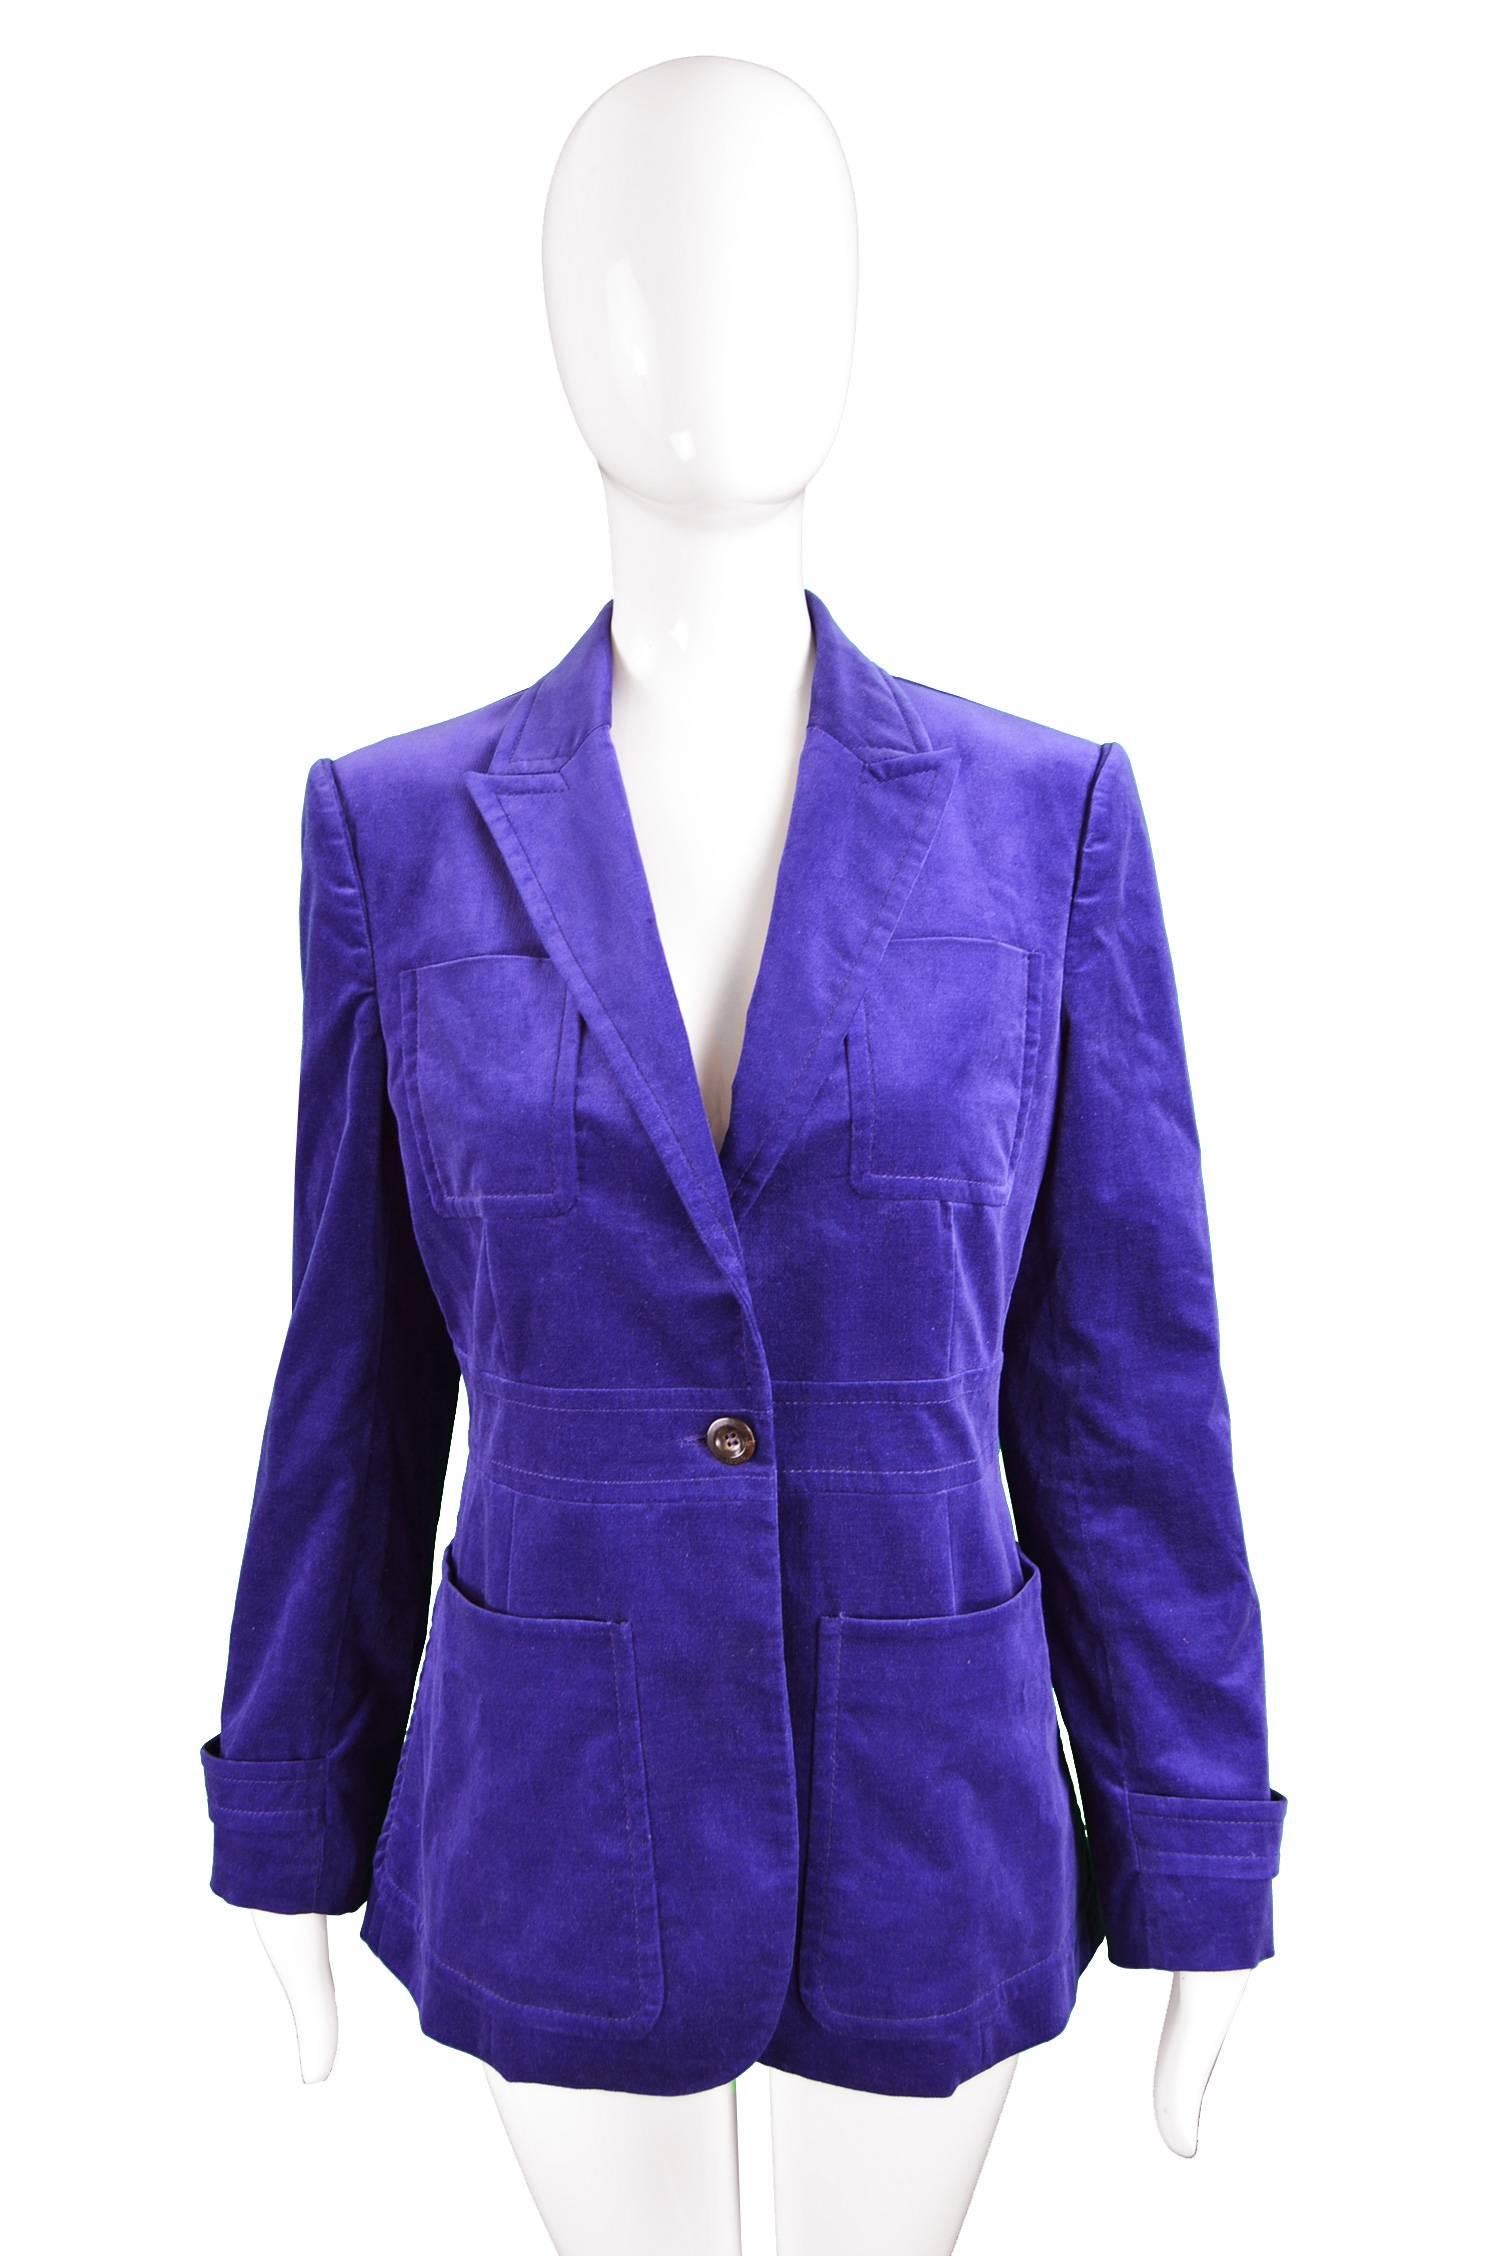 A Gucci Purple Velvet Peaked Lapels Ladies Jacket

Size: Marked 46 but fits like a UK 12/ US 8
Bust - 38” / 96cm (please remember to allow a couple of inches room for movement)
Waist - 34” / 86cm
Length (Shoulder to Hem) - 27” / 68cm
Shoulder to